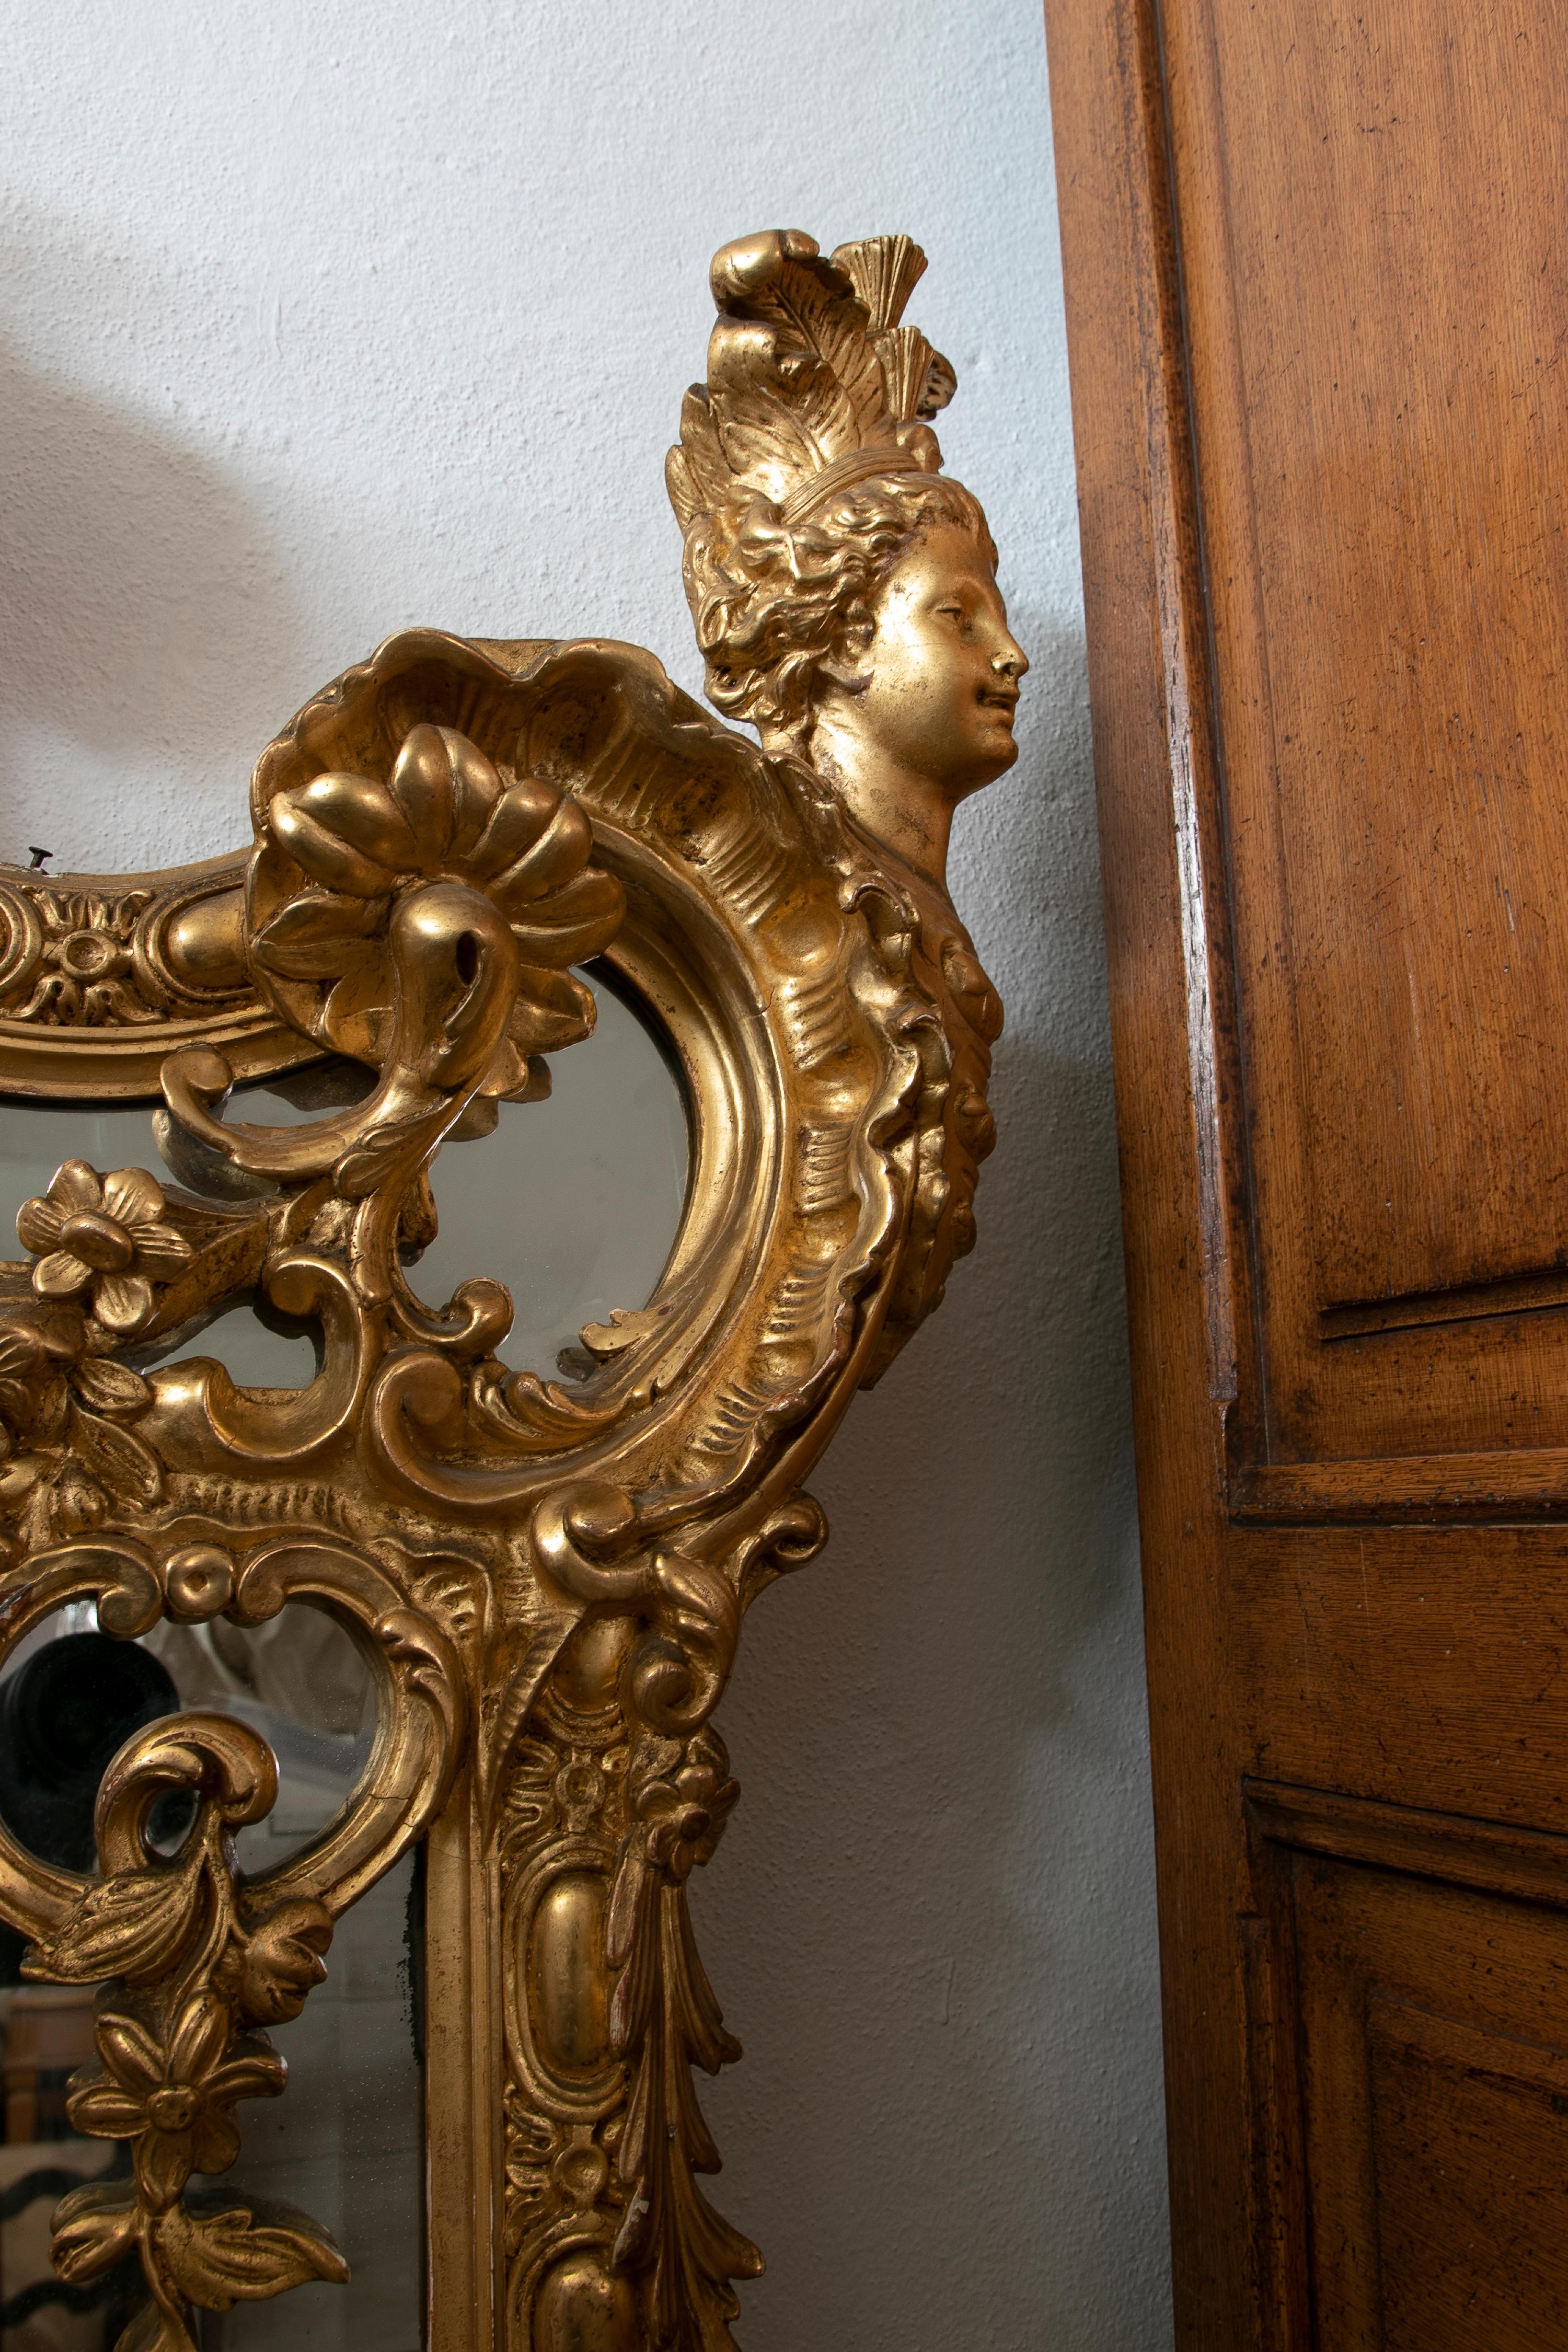 1850s French gold giltwood wall mirror with acanthus leaf scrolls decoration.